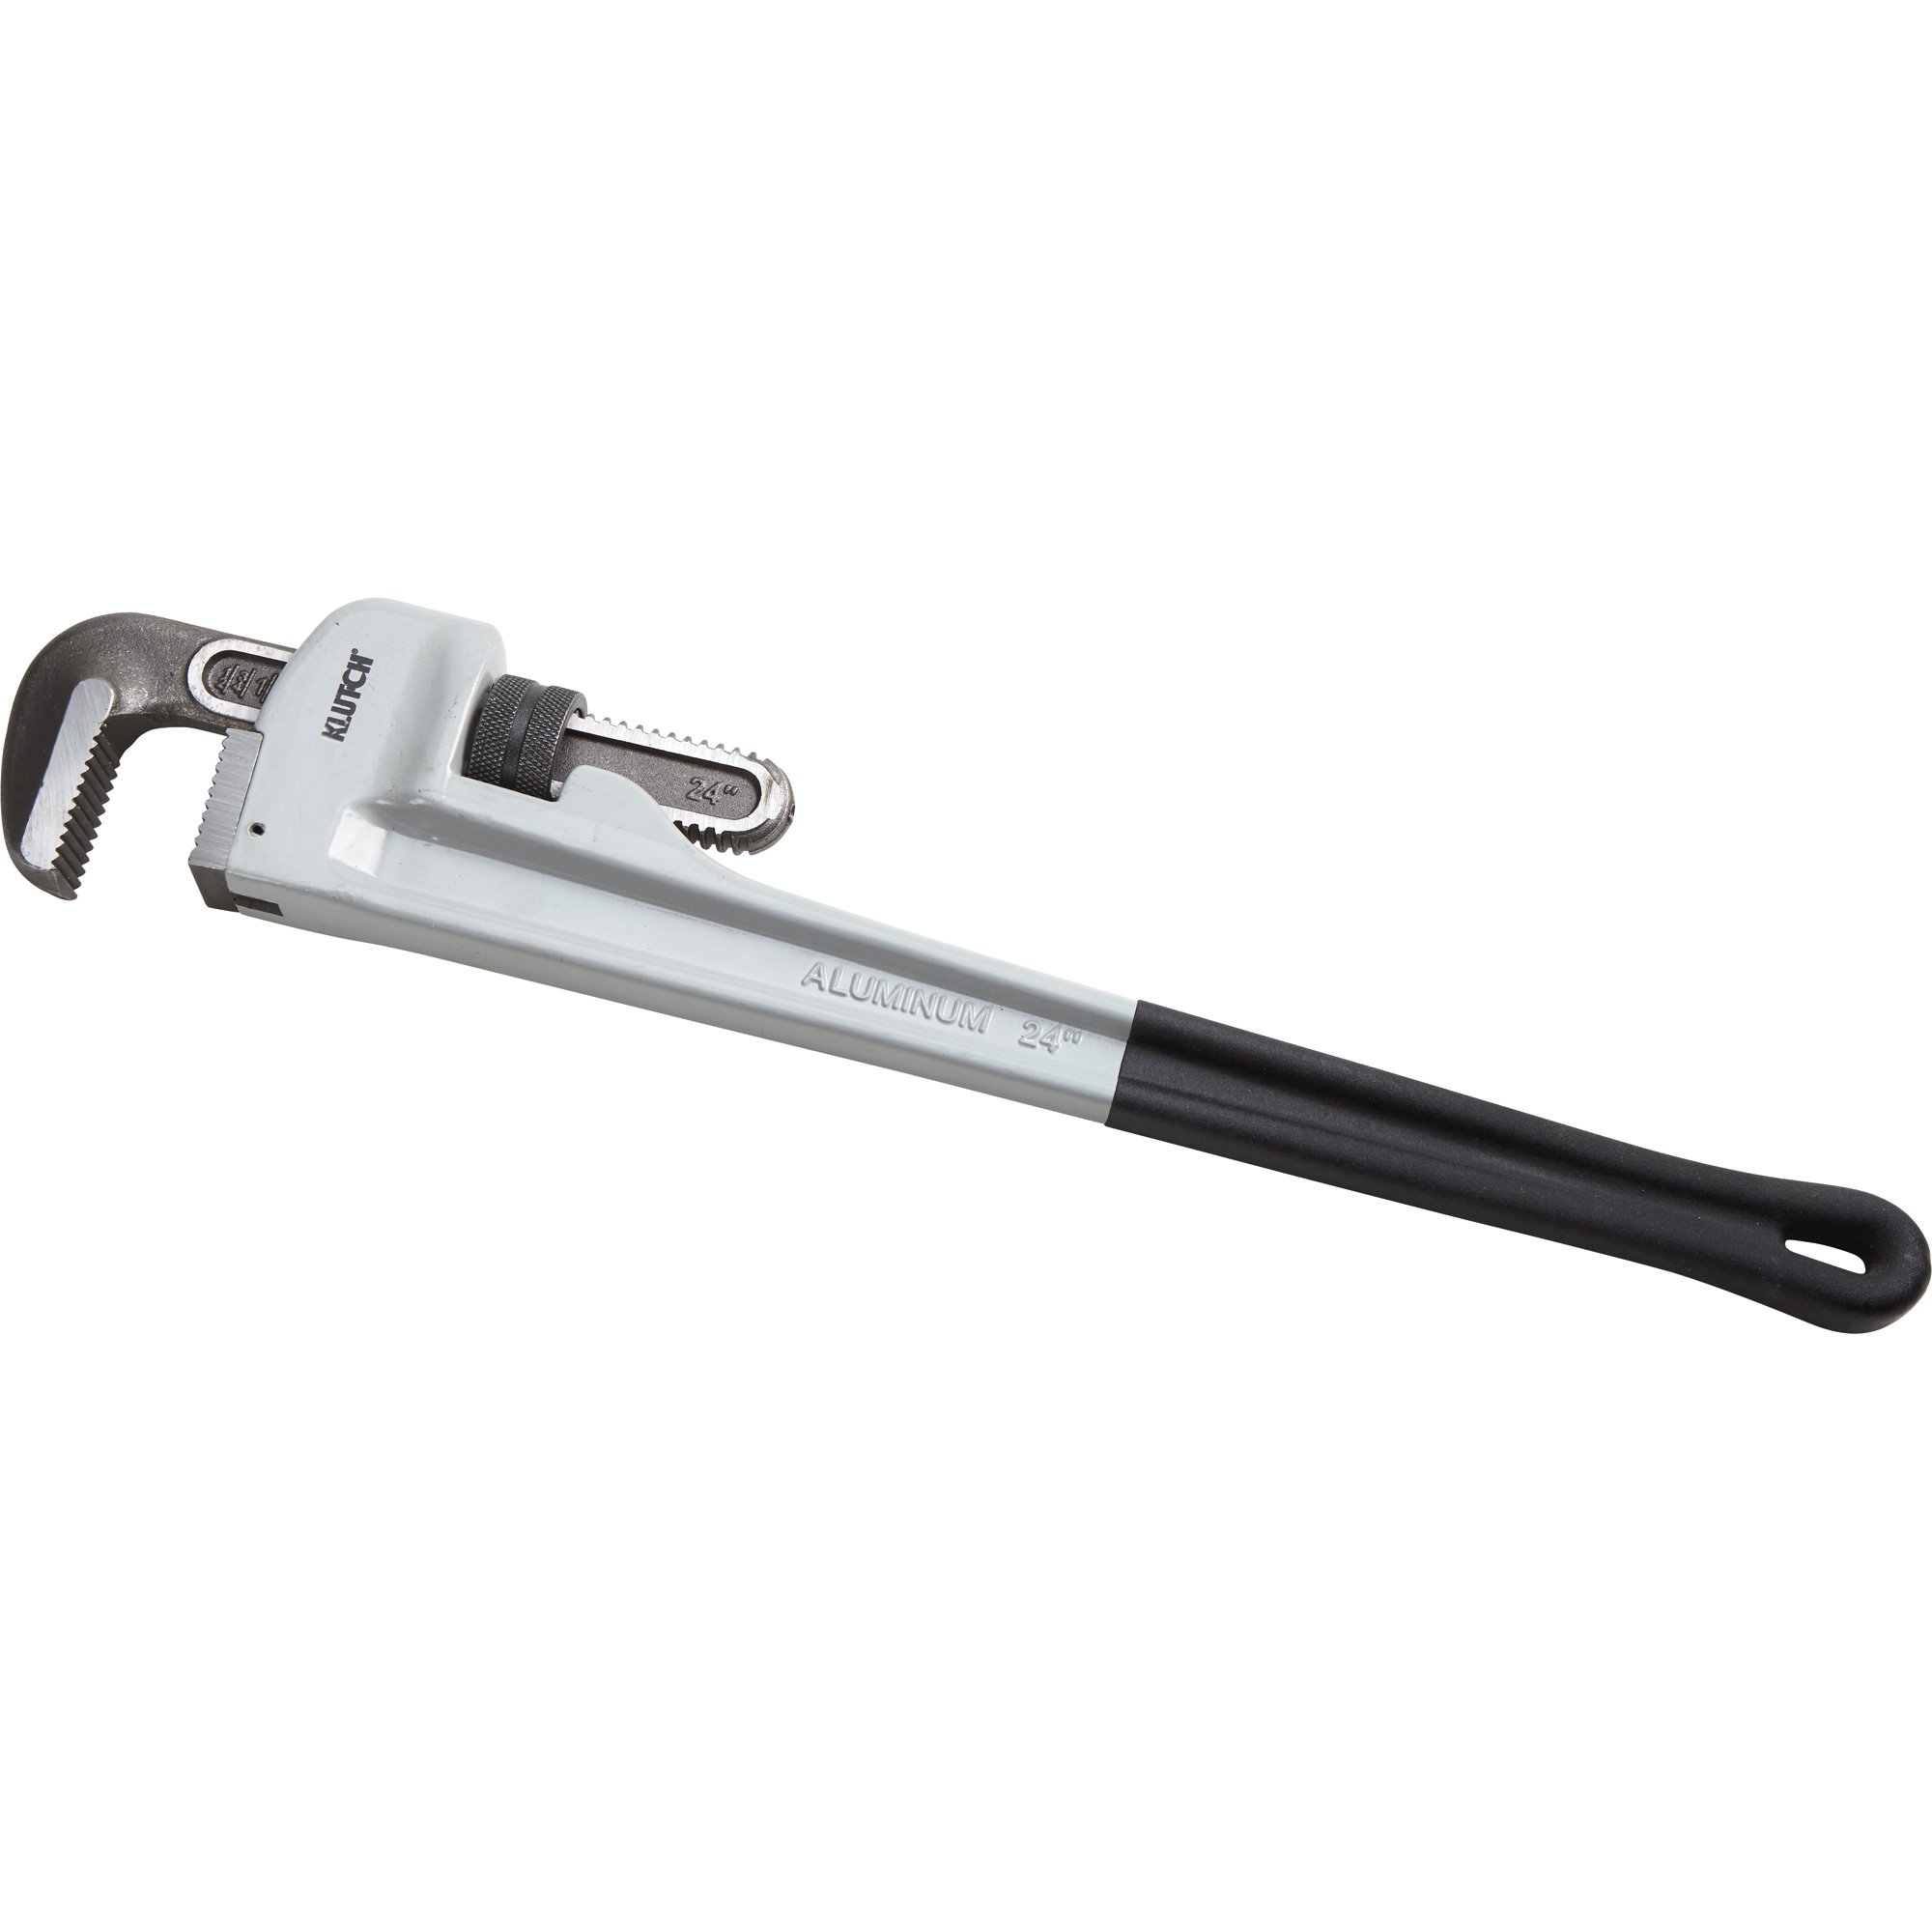 Klutch 24in. Aluminum Pipe Wrench | Northern Tool + Equipment